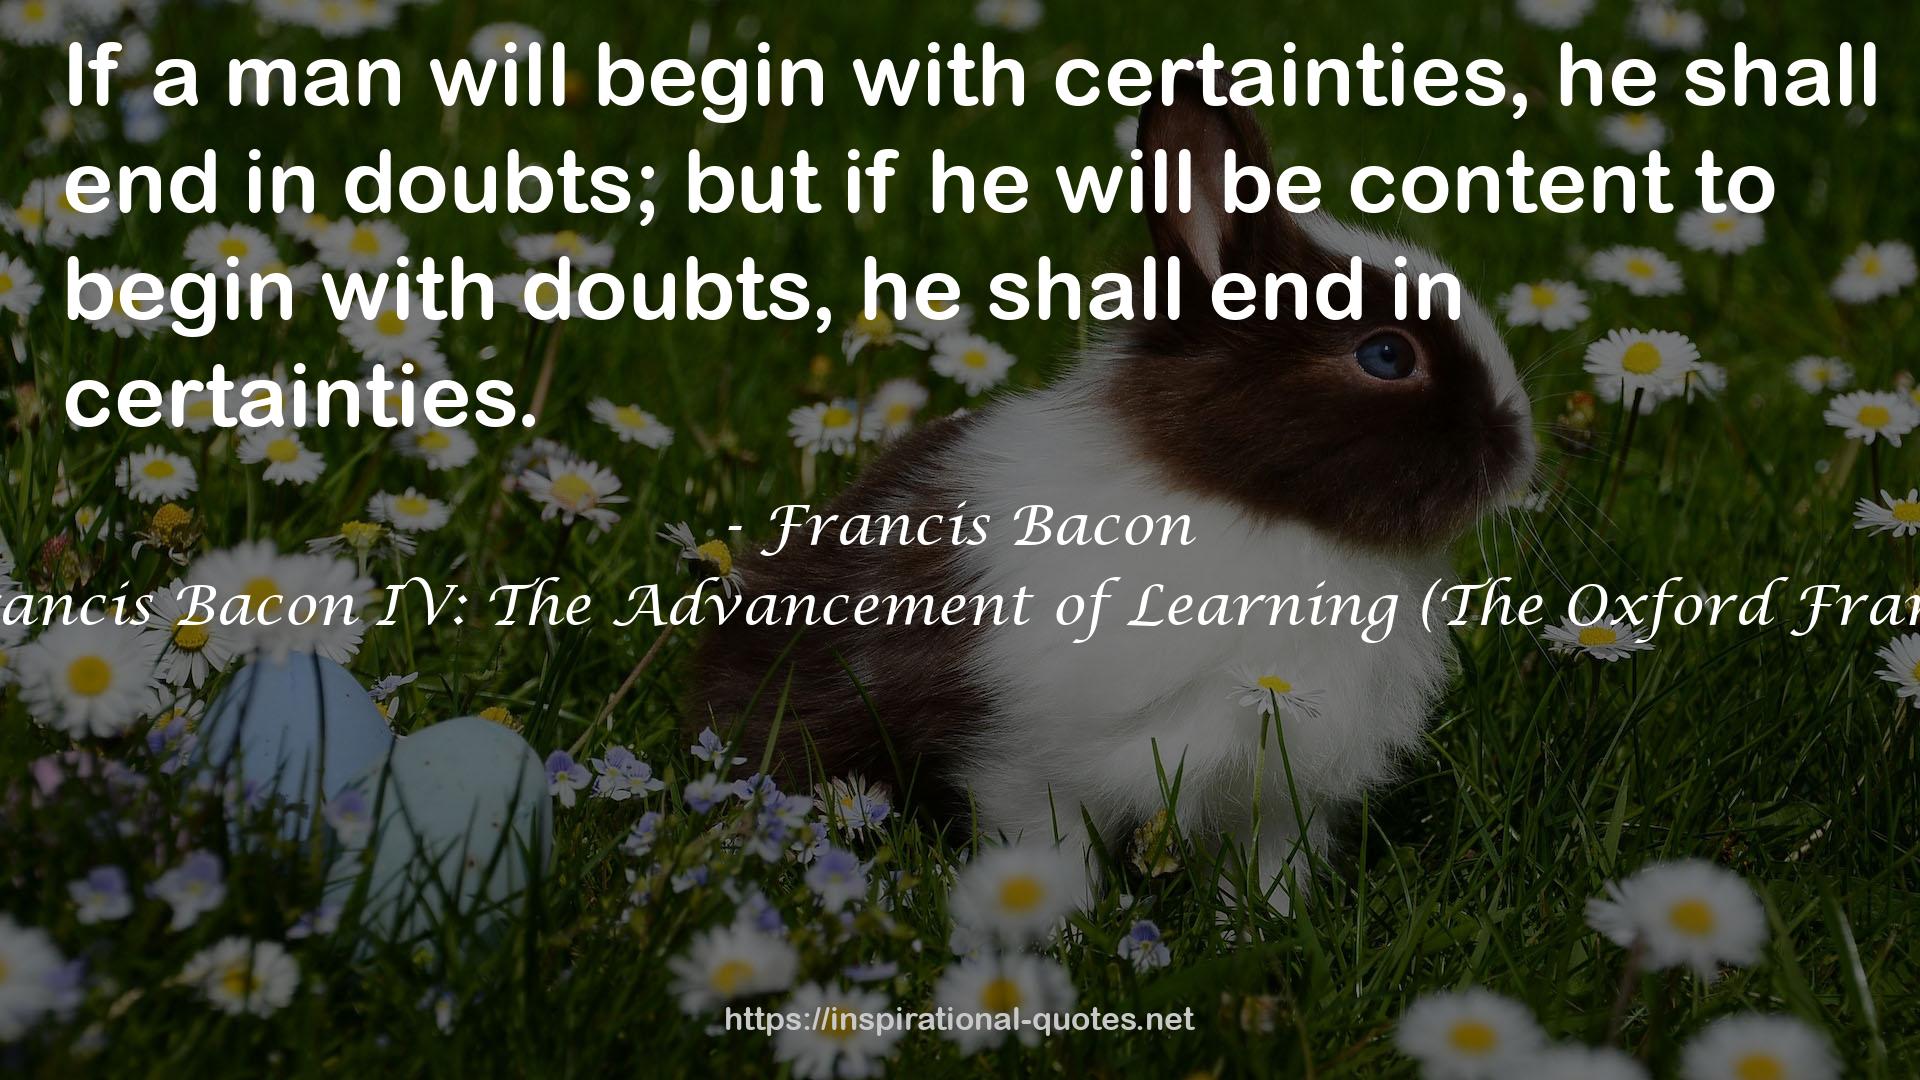 The Oxford Francis Bacon IV: The Advancement of Learning (The Oxford Francis Bacon, #4) QUOTES